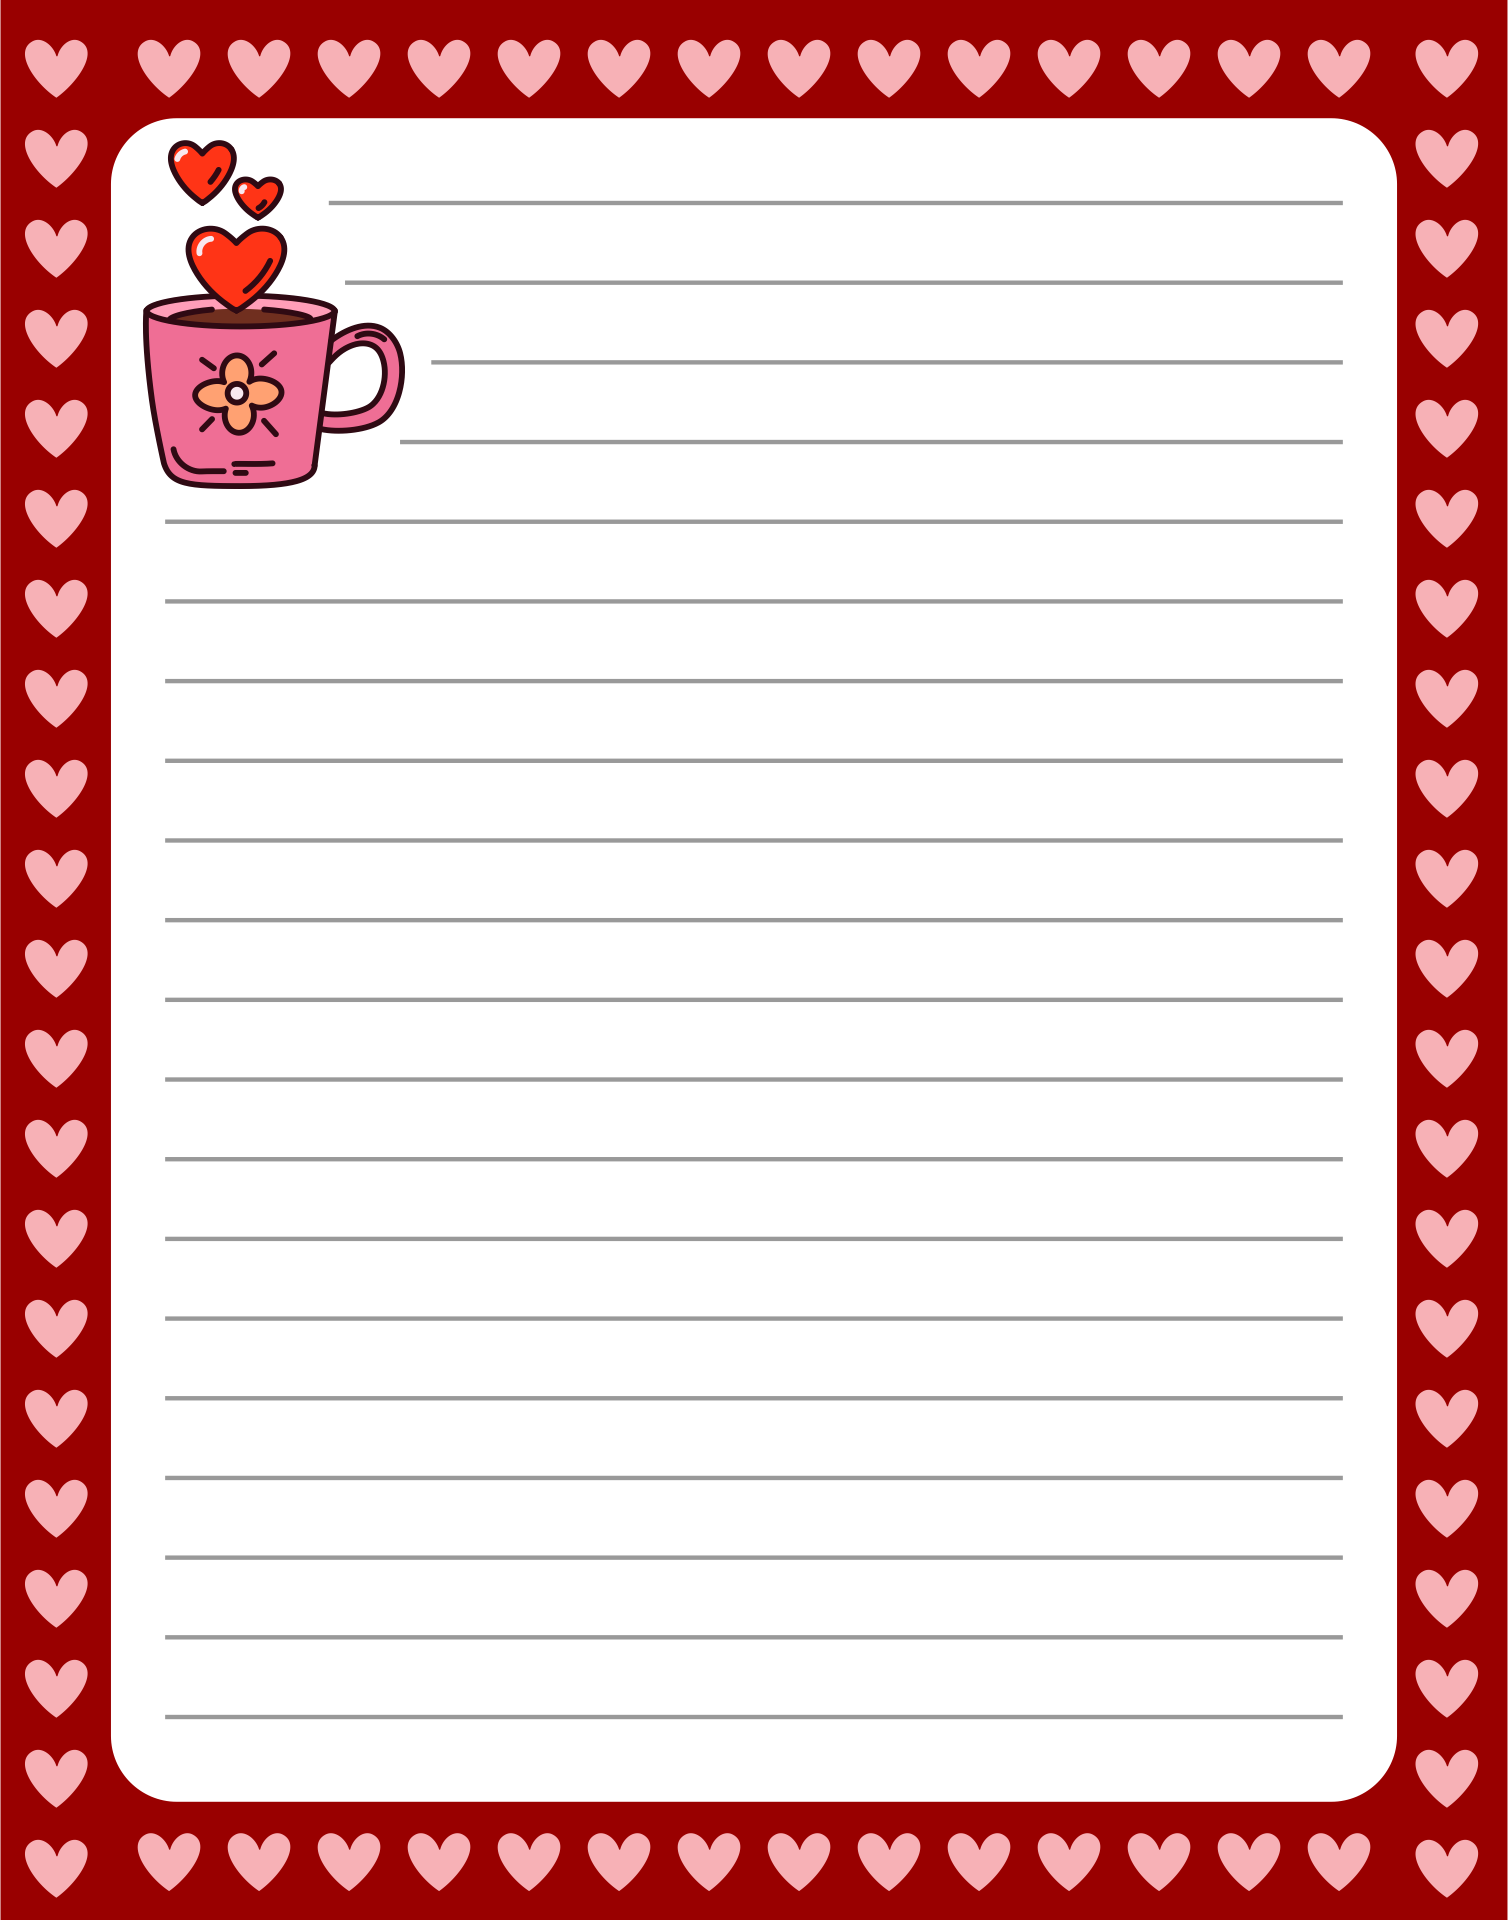 8 Best Images of Cute Owls Love Letter Stationery Printable Free